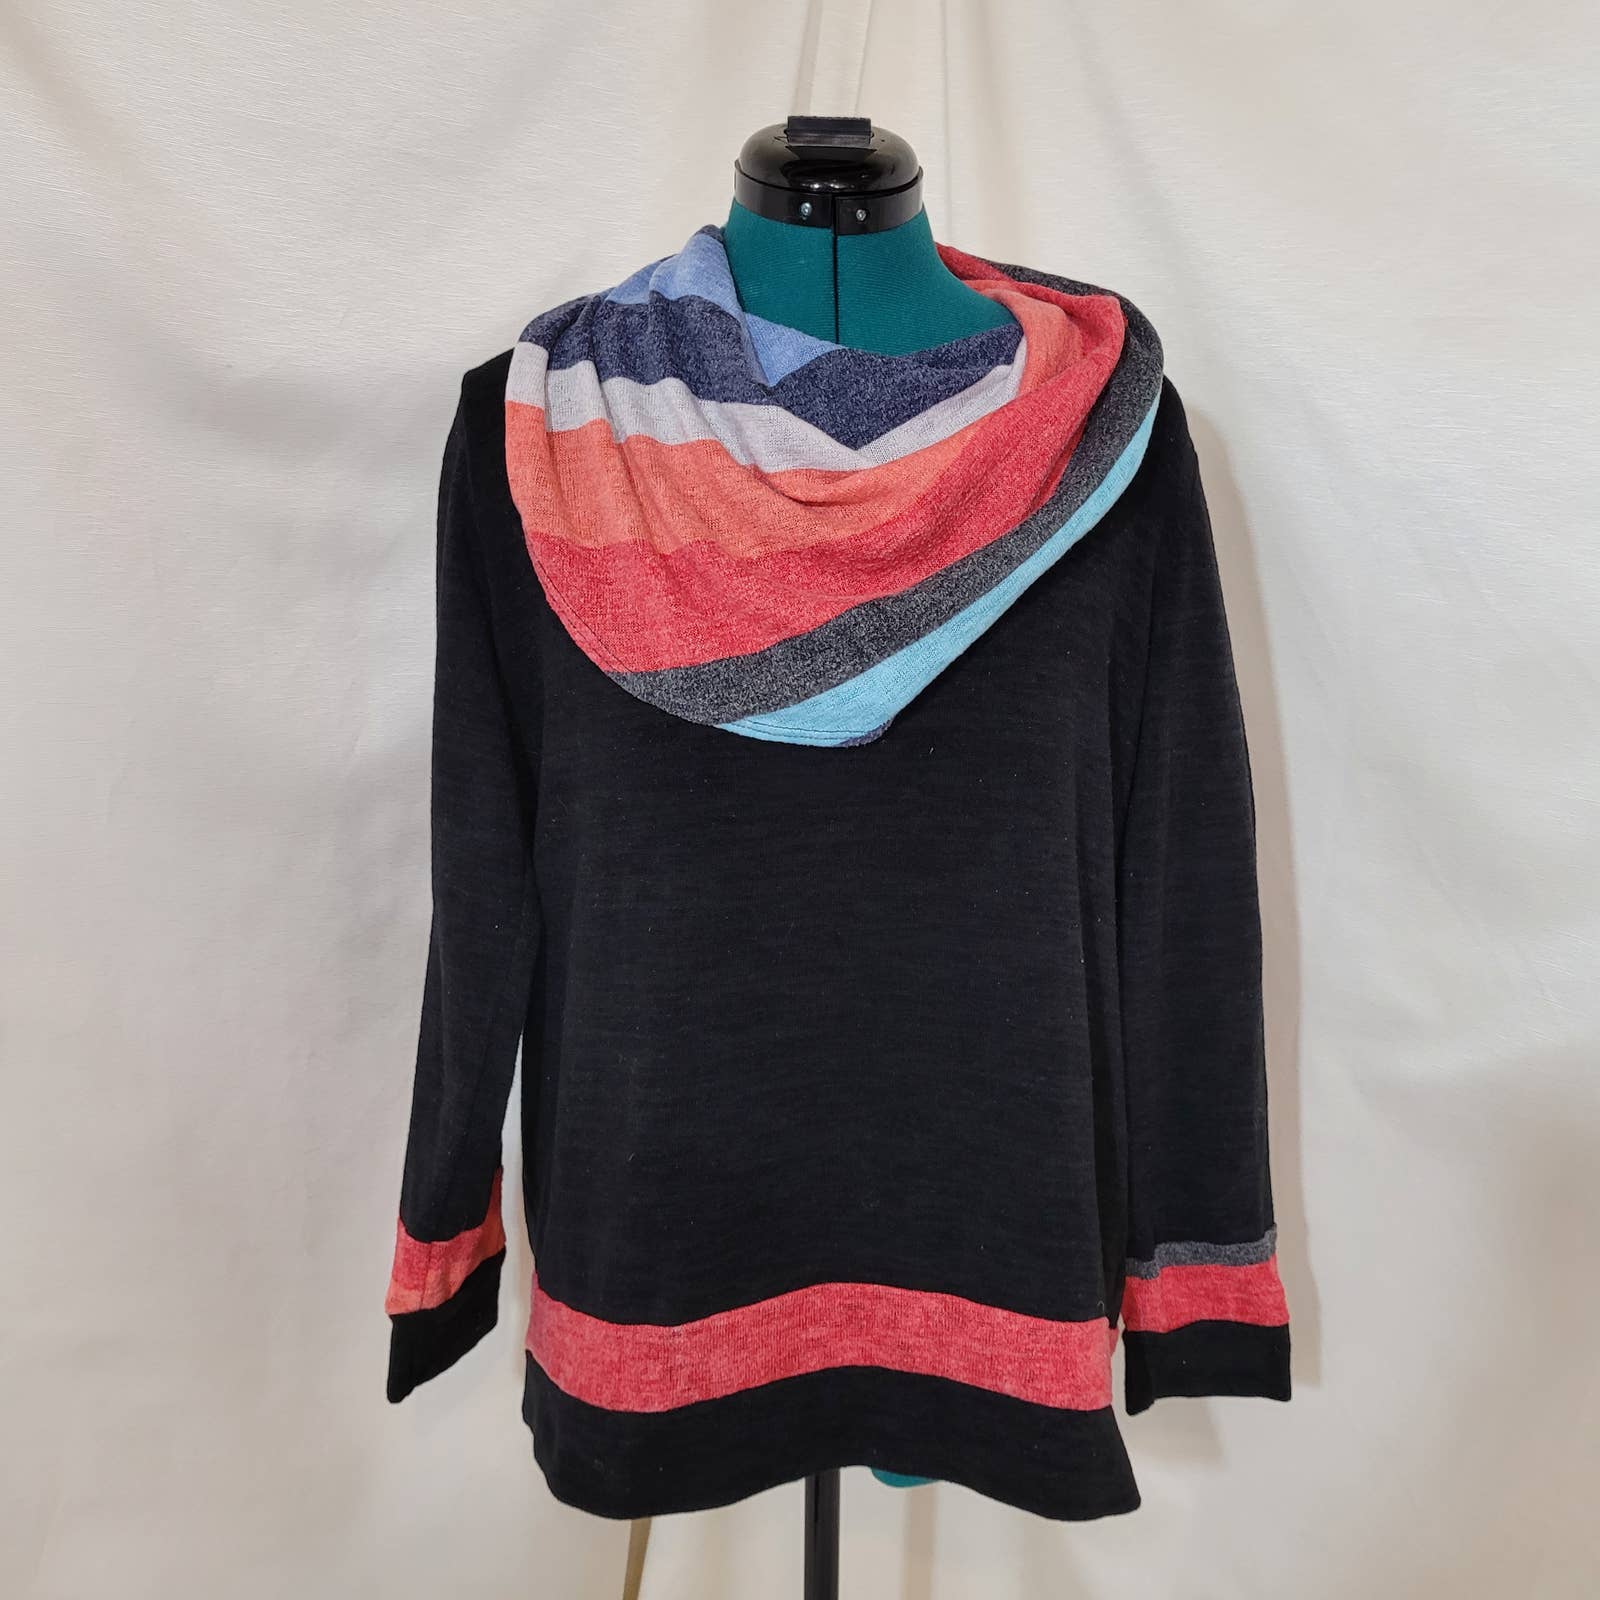 Egs Black Cowl Neck Sweater with Striped Pattern - Size Extra LargeMarkita's ClosetEgs